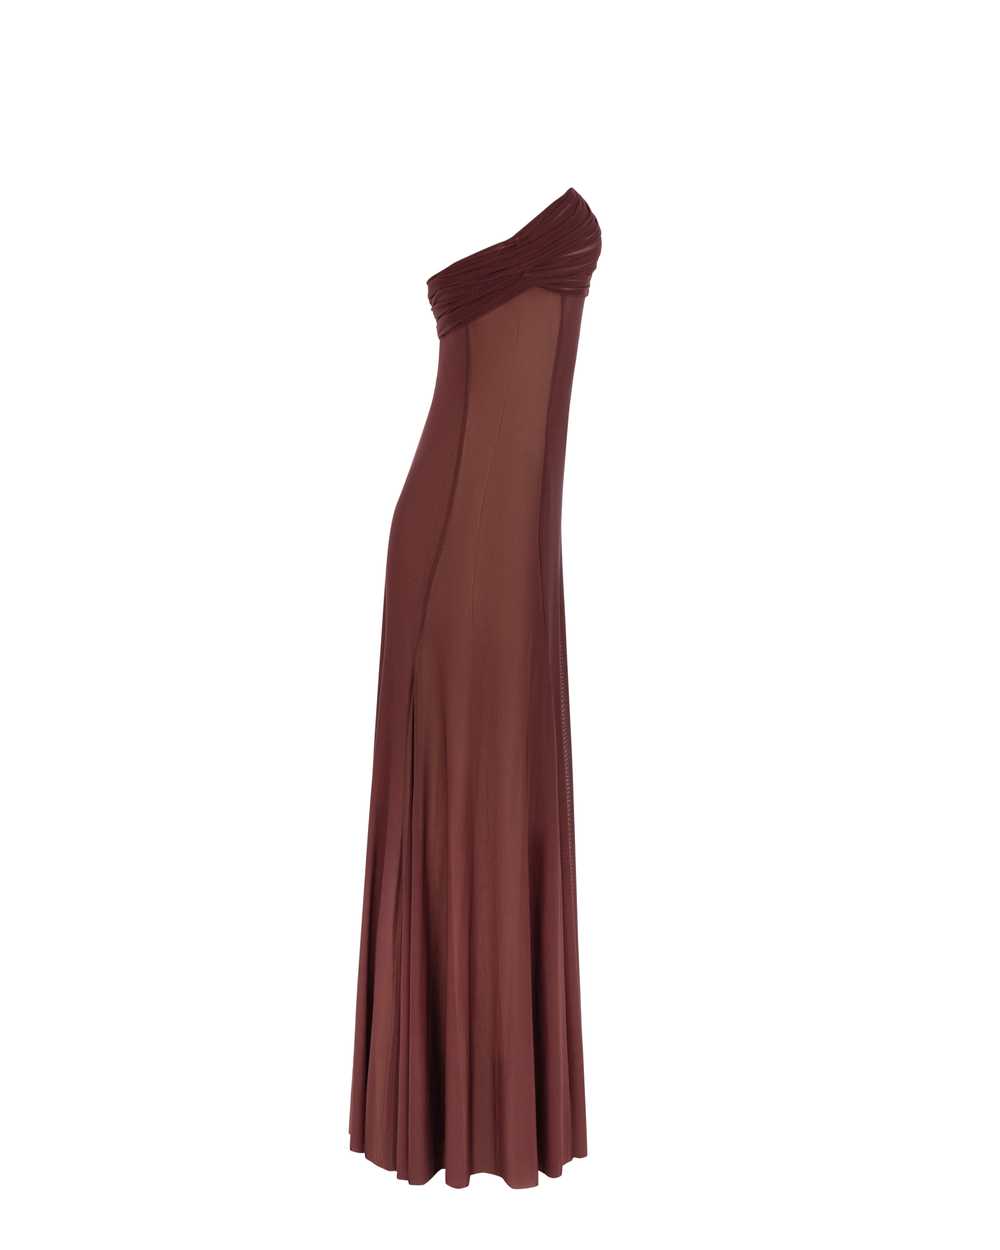 Milla Second-skin maxi dress in chocolate color - image 7